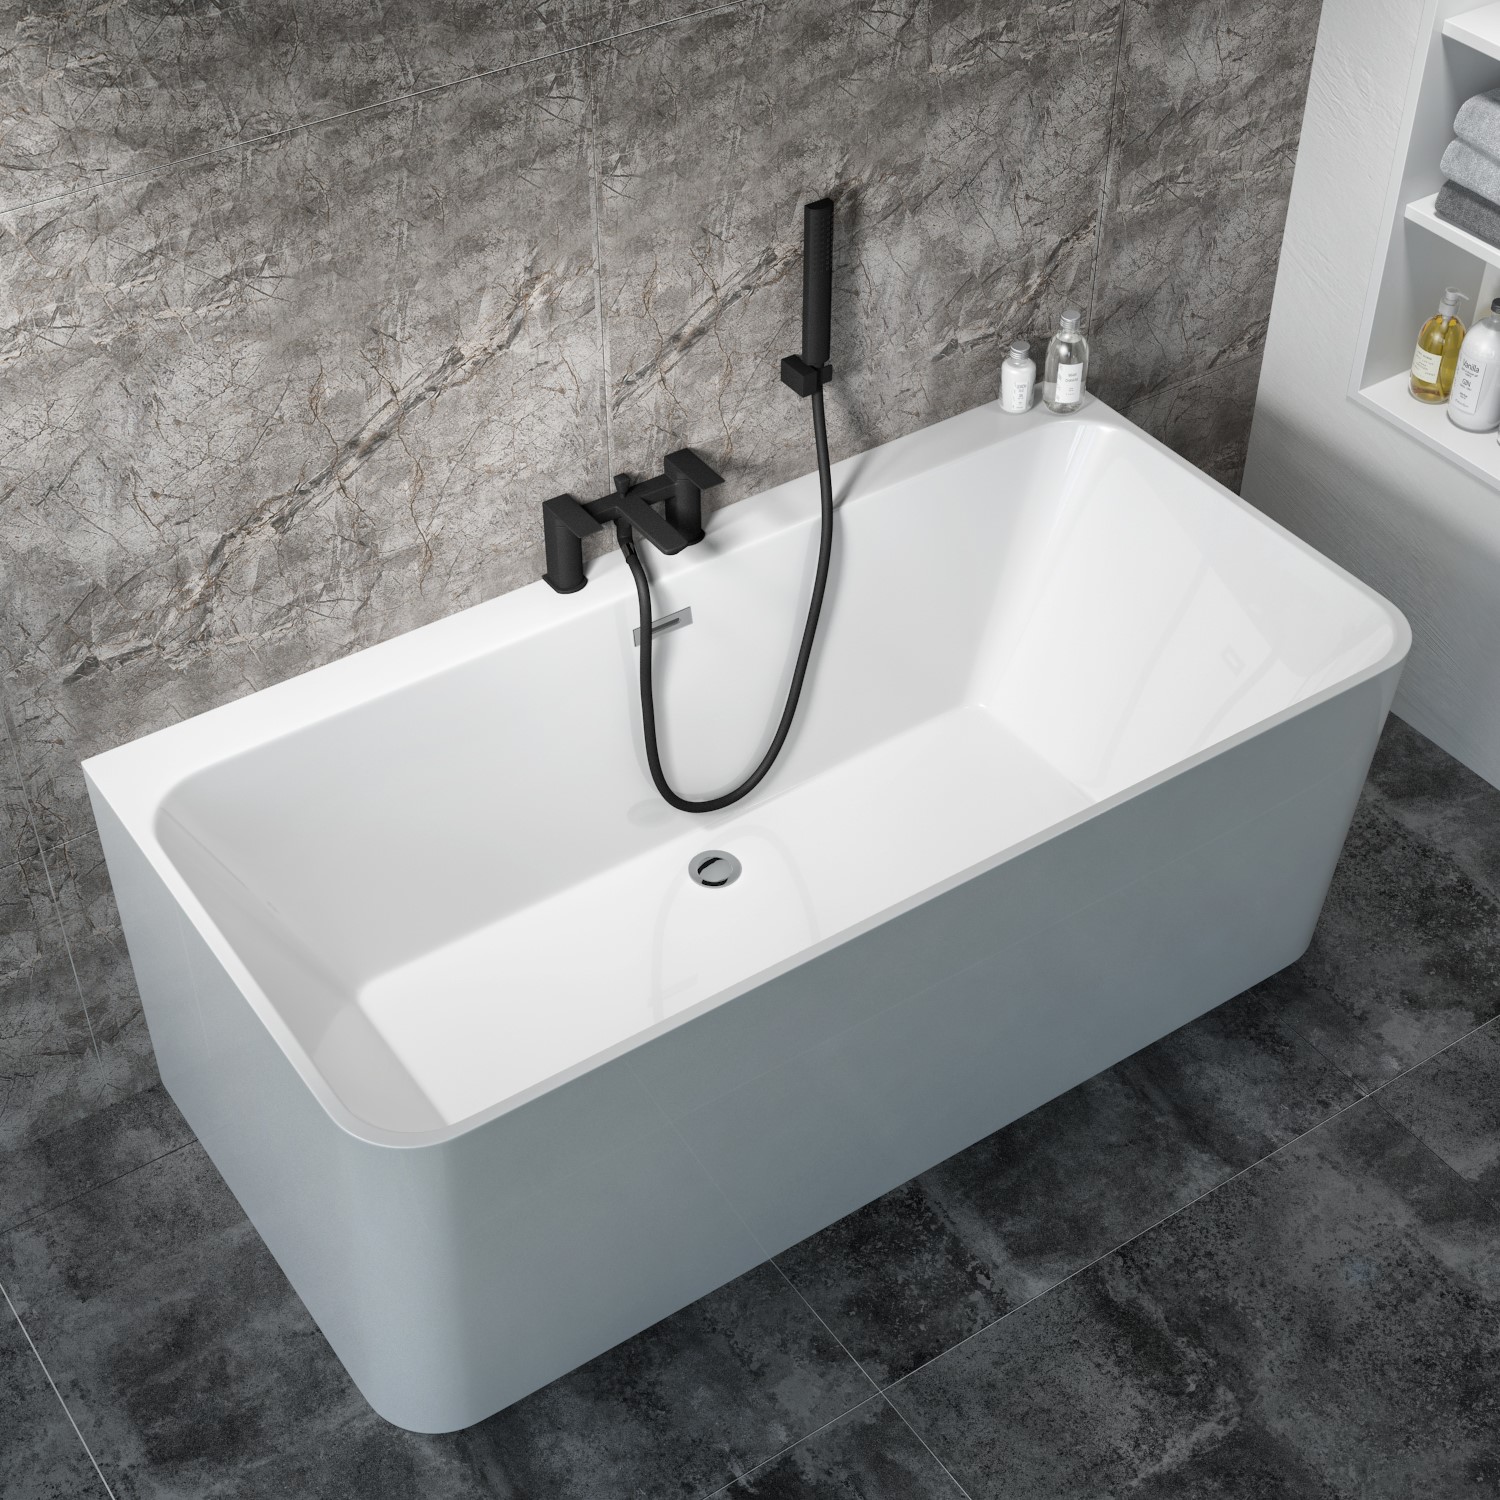 Freestanding Double Ended Back To Wall, Freestanding Bathtub Against Wall